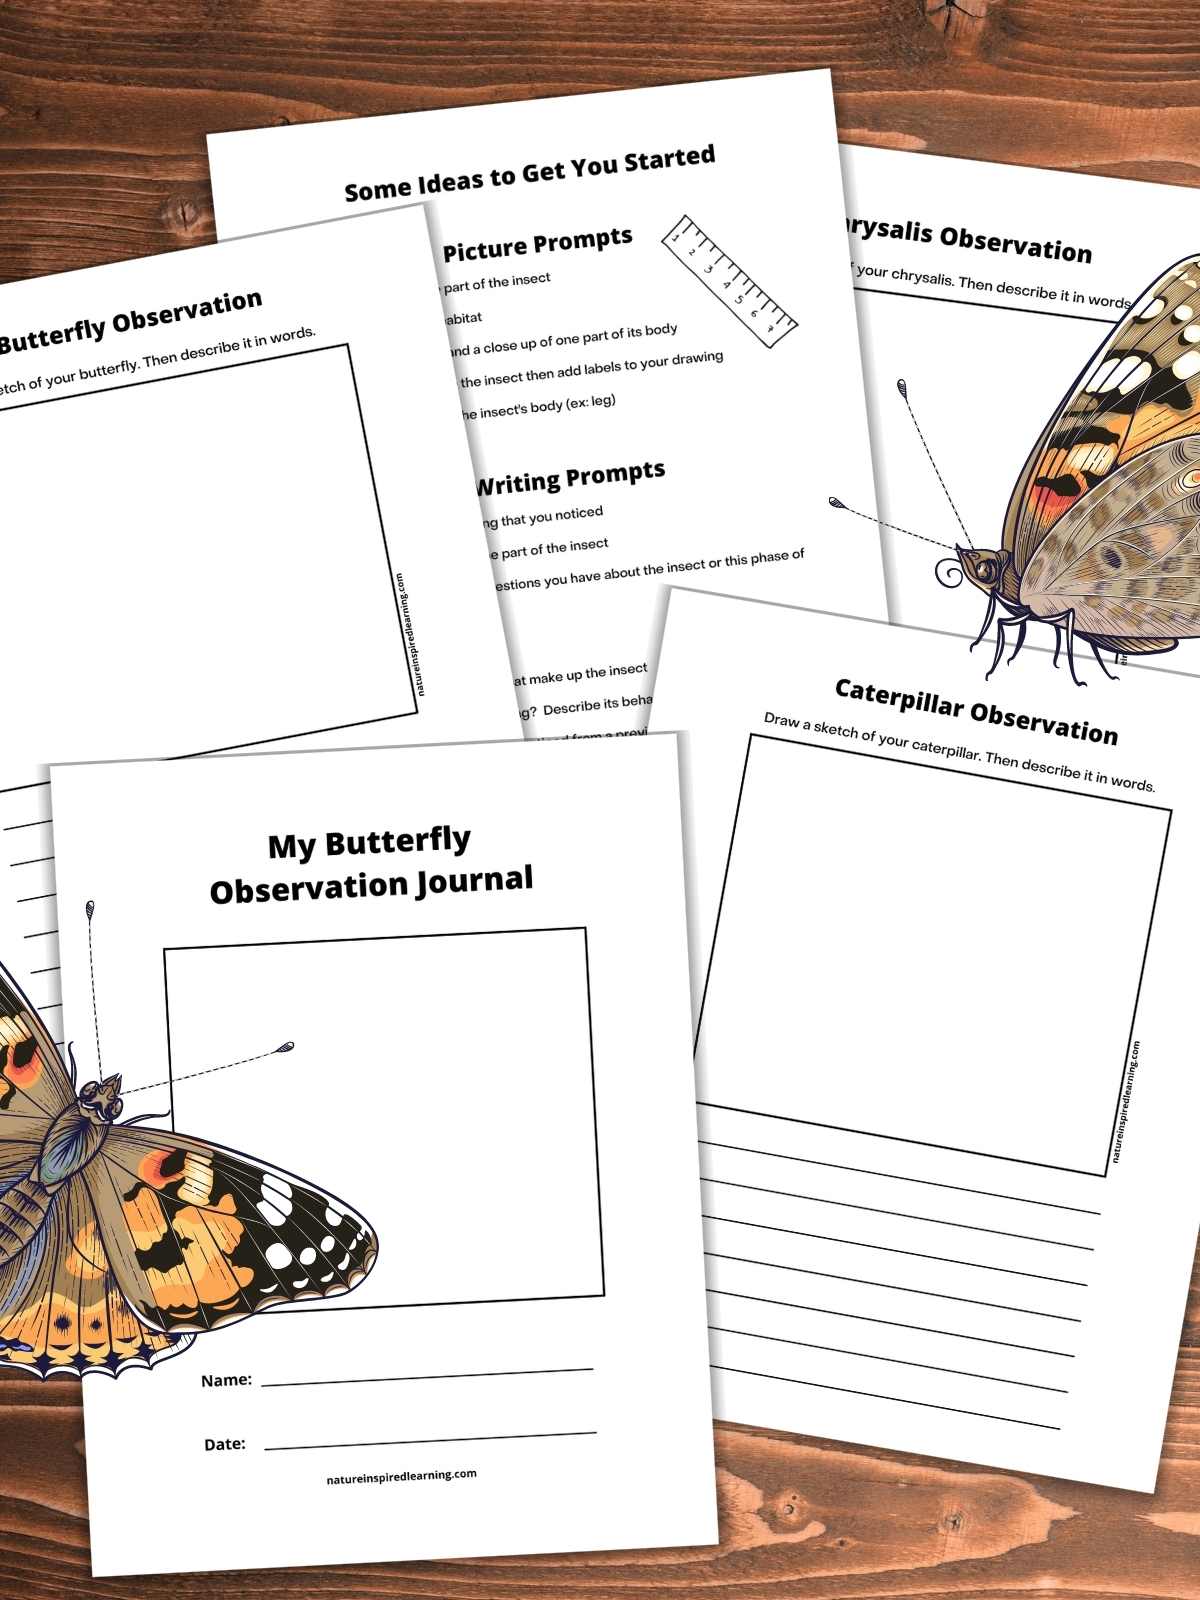 butterfly observation journal cover, caterpillar, chrysalis, and butterfly journal pages along with writing prompts overlapping on a wooden background. Butterflies bottom left and upper right